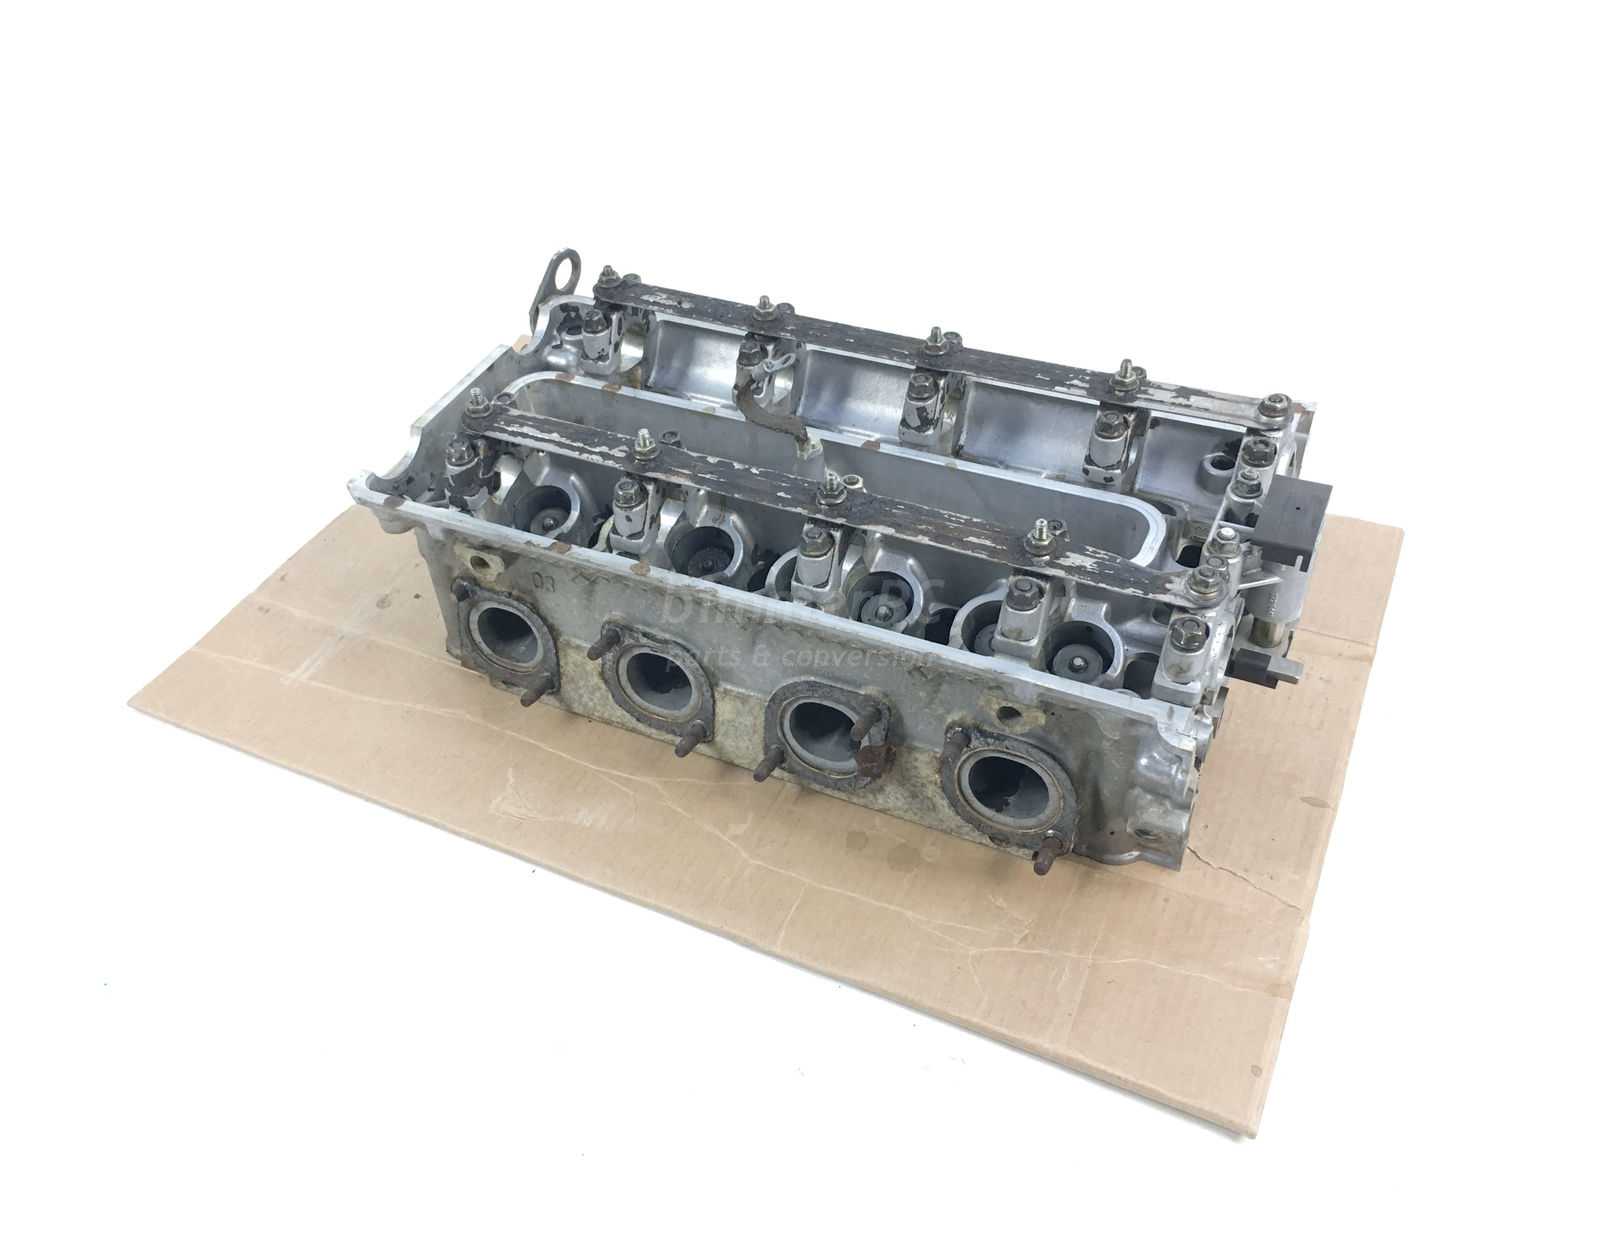 Picture of BMW 11121702374 Engine Right Cylinder Head Bank 1 Cyl 1-4 M62 B44 4.4L V8 Motor E31 E38 E39 for sale